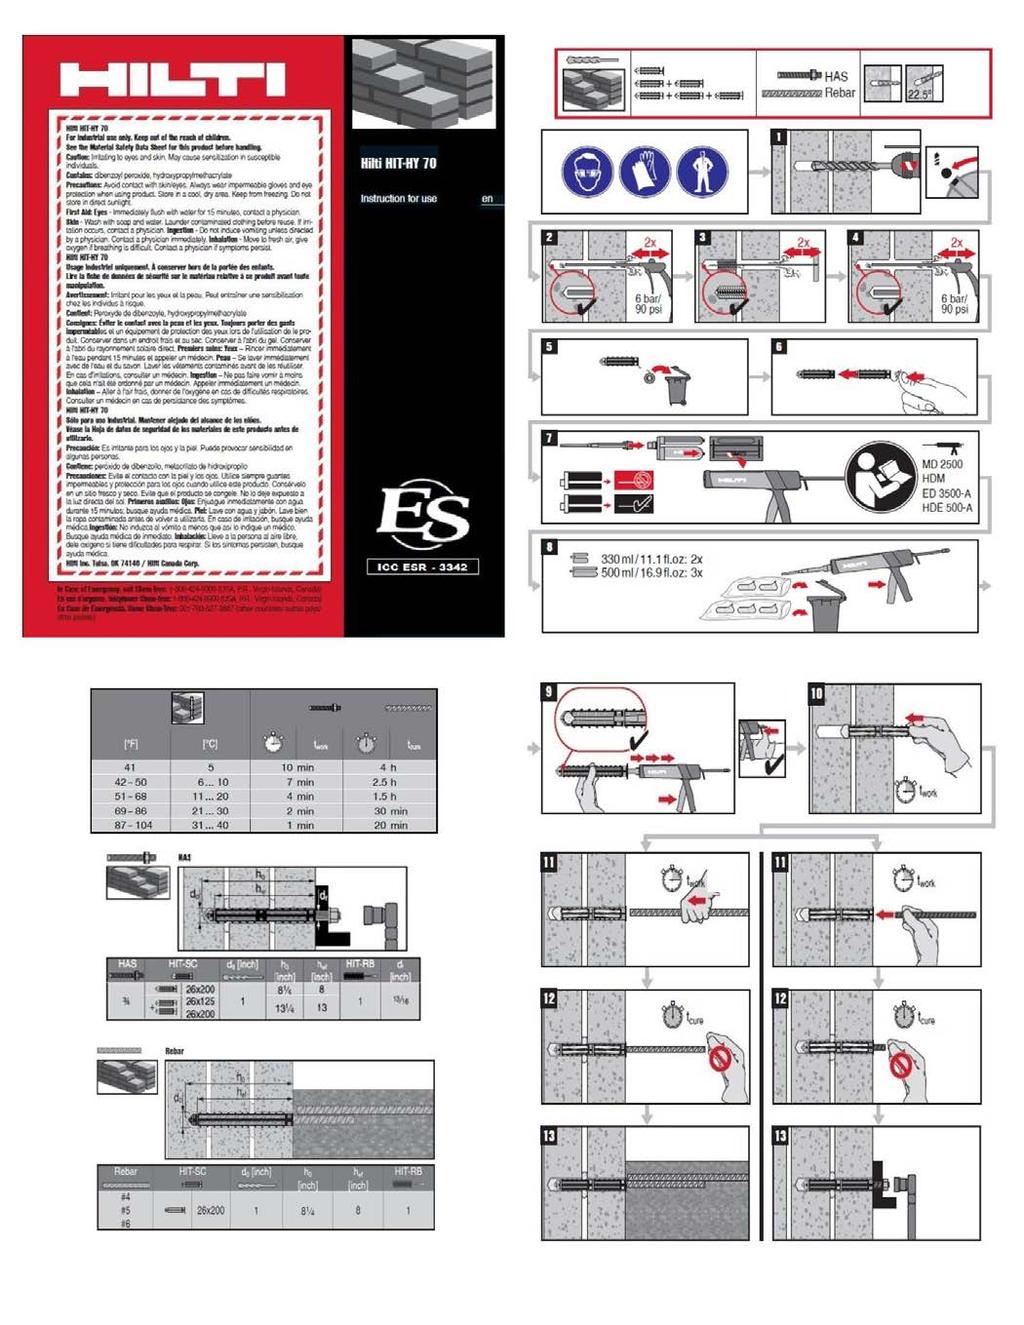 ESR-3342 Most Widely Accepted and Trusted Page 6 of 8 FIGURE 3 HILTI